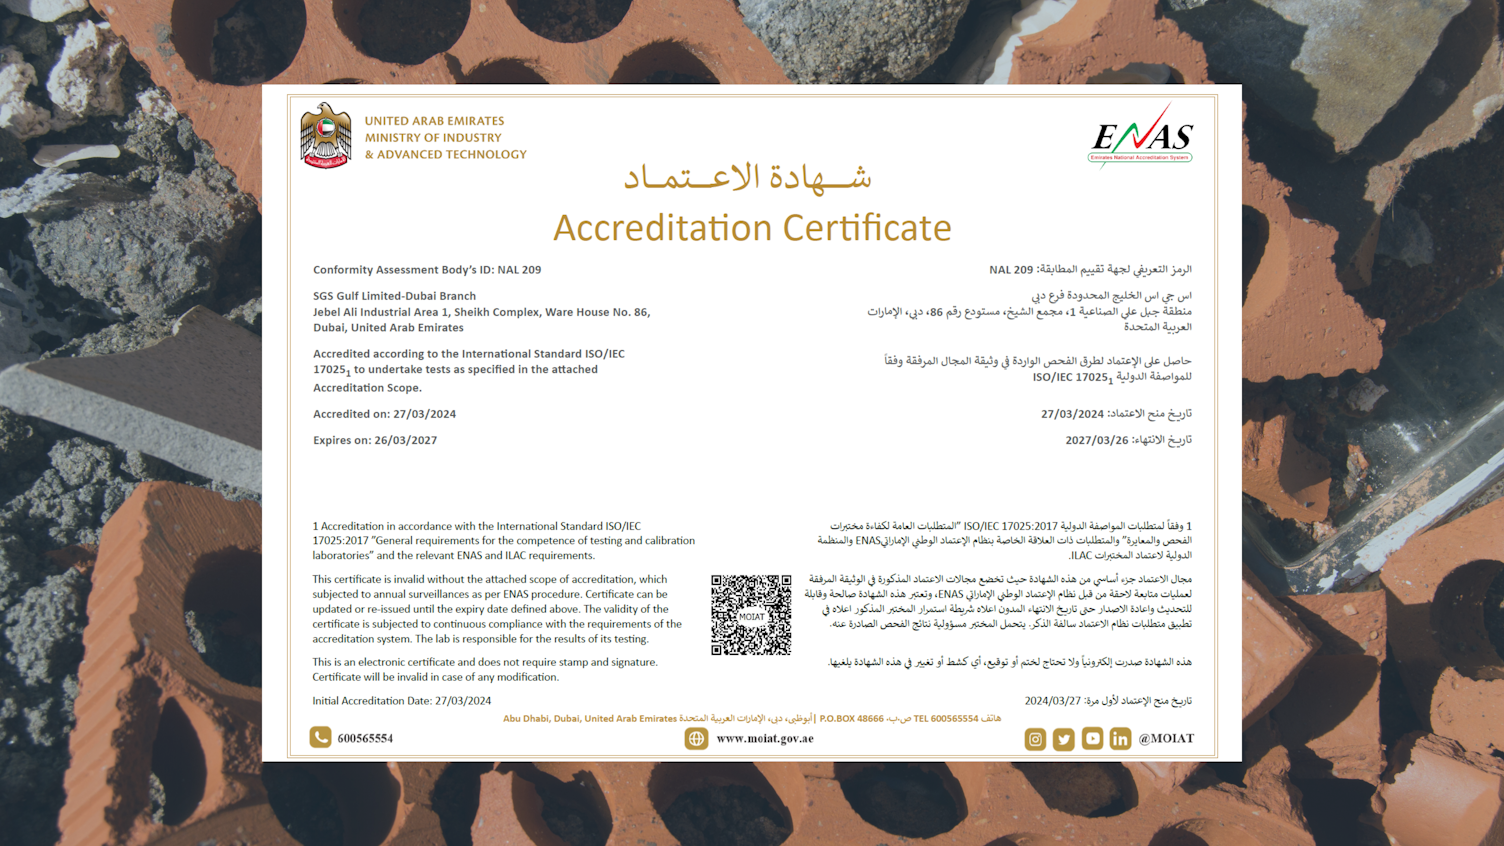 /sitecore/media library/SGSCorp/Images/L MiddleEast/SGS UAE Now Accredited for Geotechnical and Construction Material Testing in Abu Dhabi